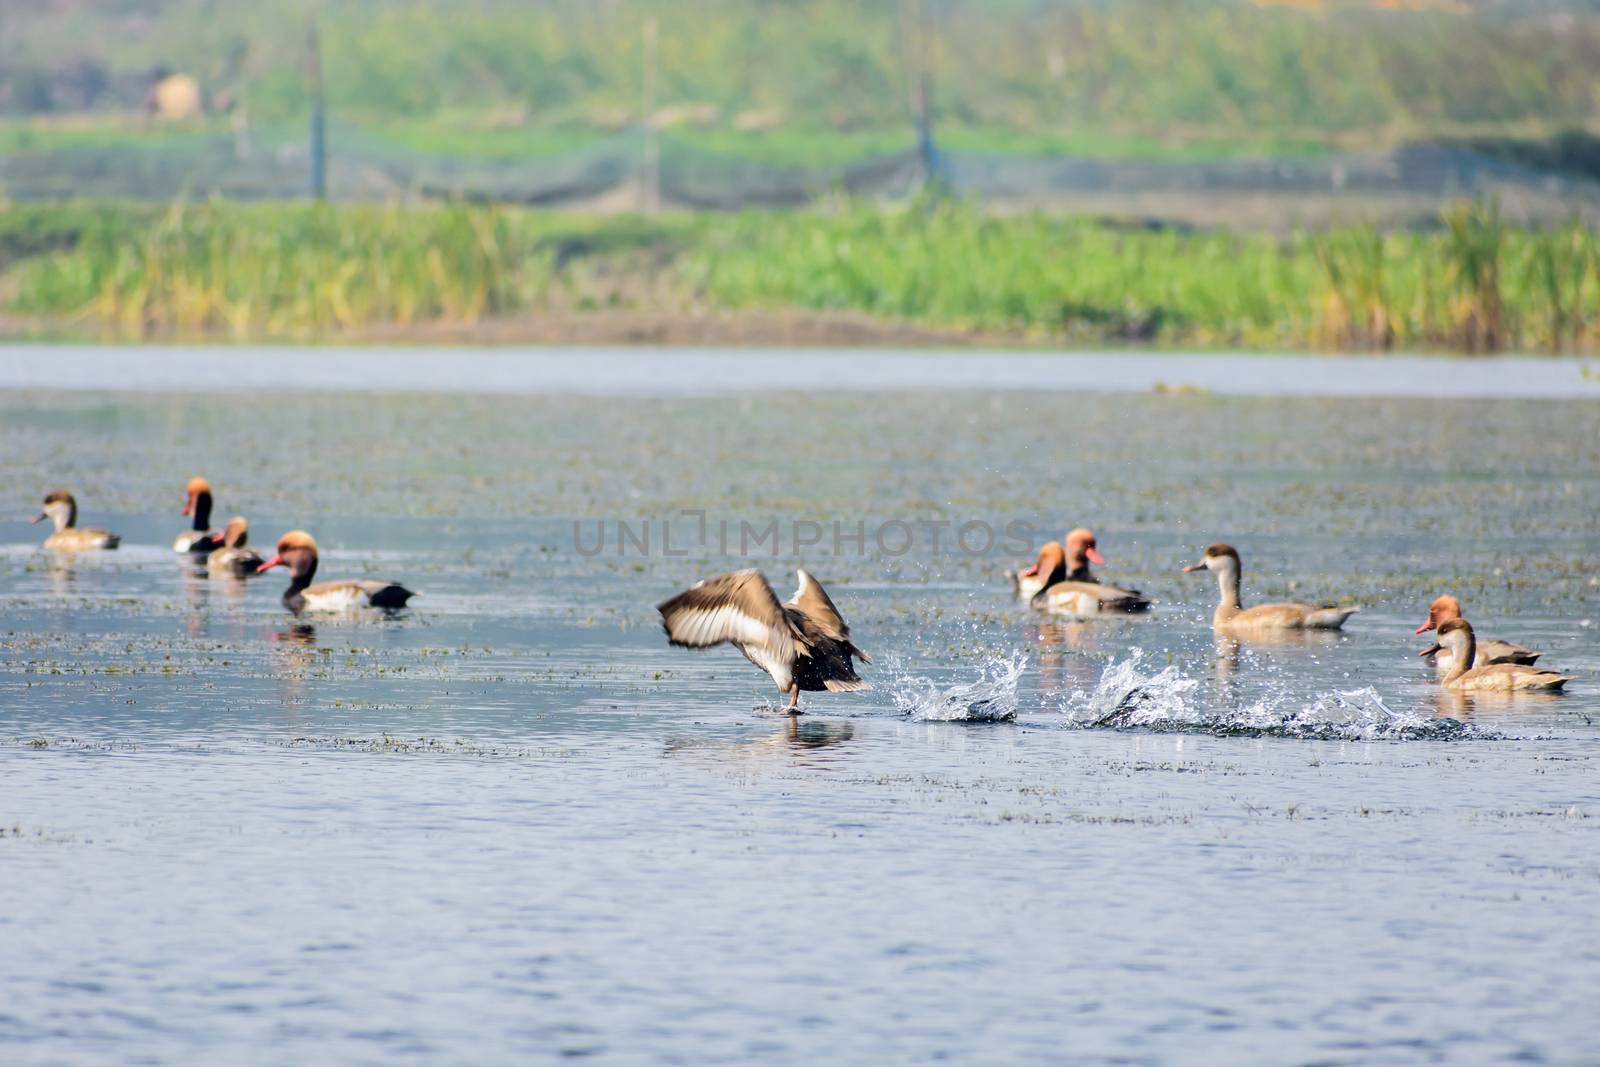 Flock of migratory Red crested pochard Aythyinae flying on lake. Freshwater and coastal bird species spotted in waterbirds Vedanthangal Bird Sanctuary Kancheepuram India. A paradise for avian life.